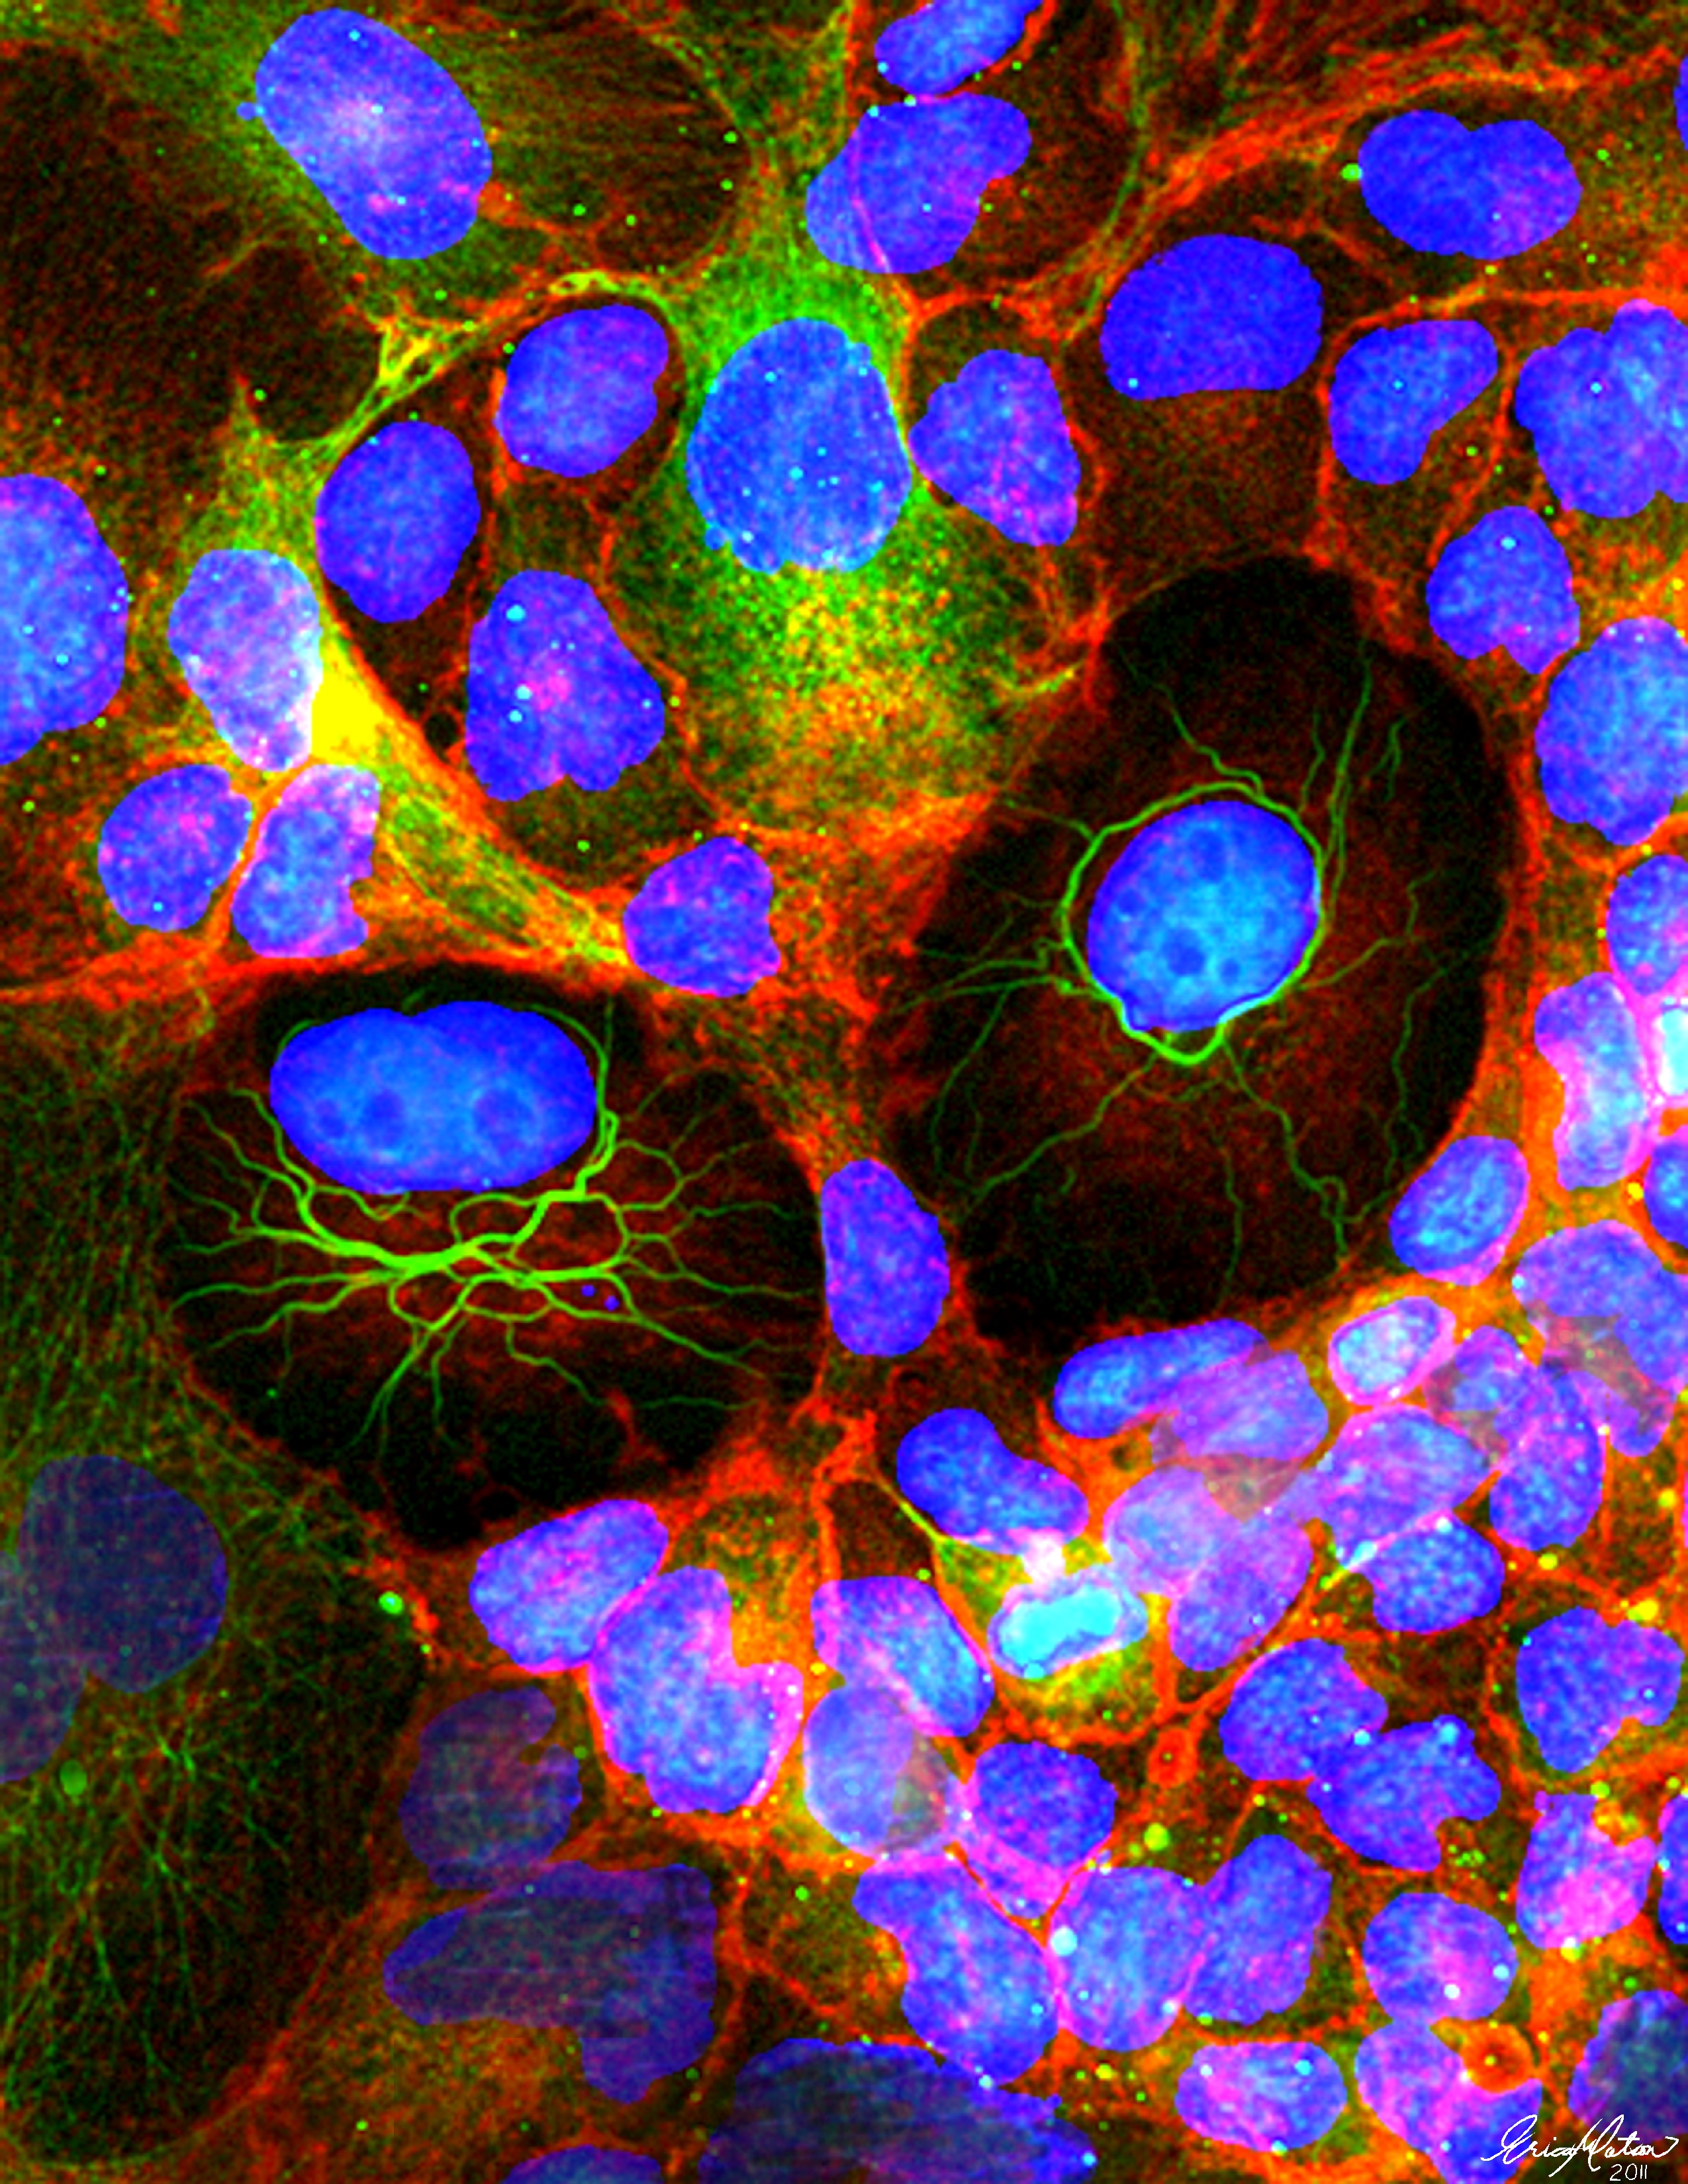 Trophoblast cells (by kind permission of Dr Erica Watson)